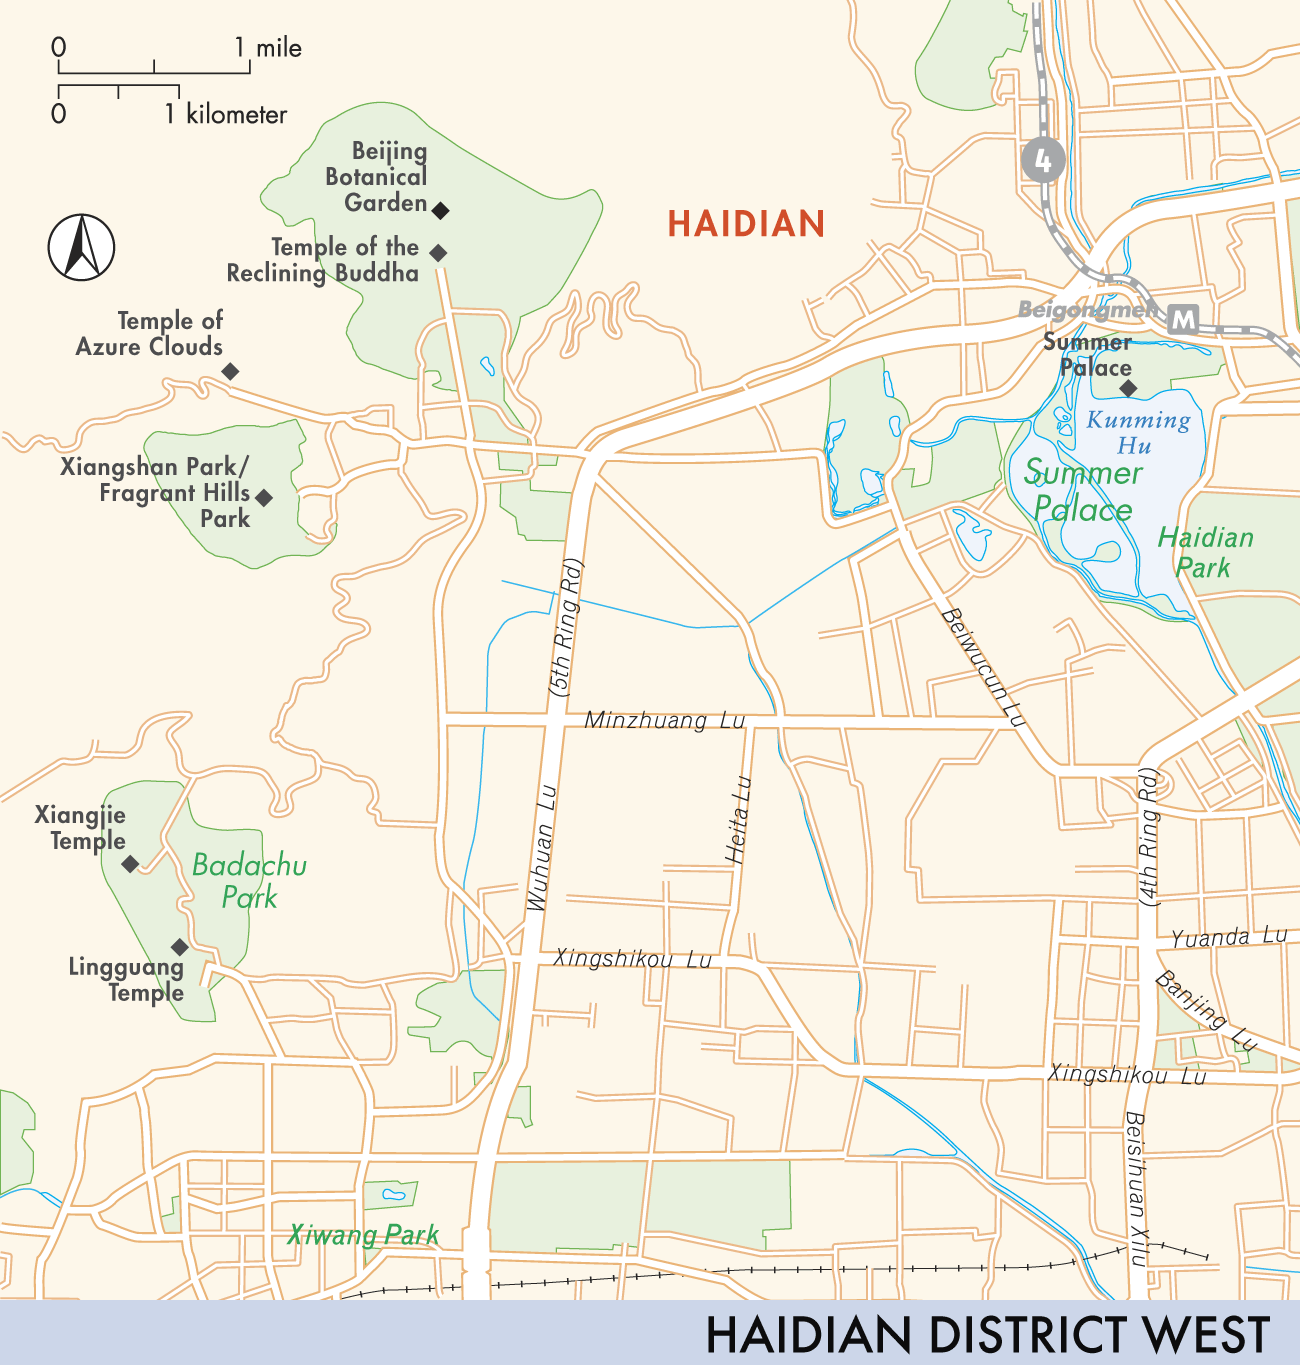 Haidian District West